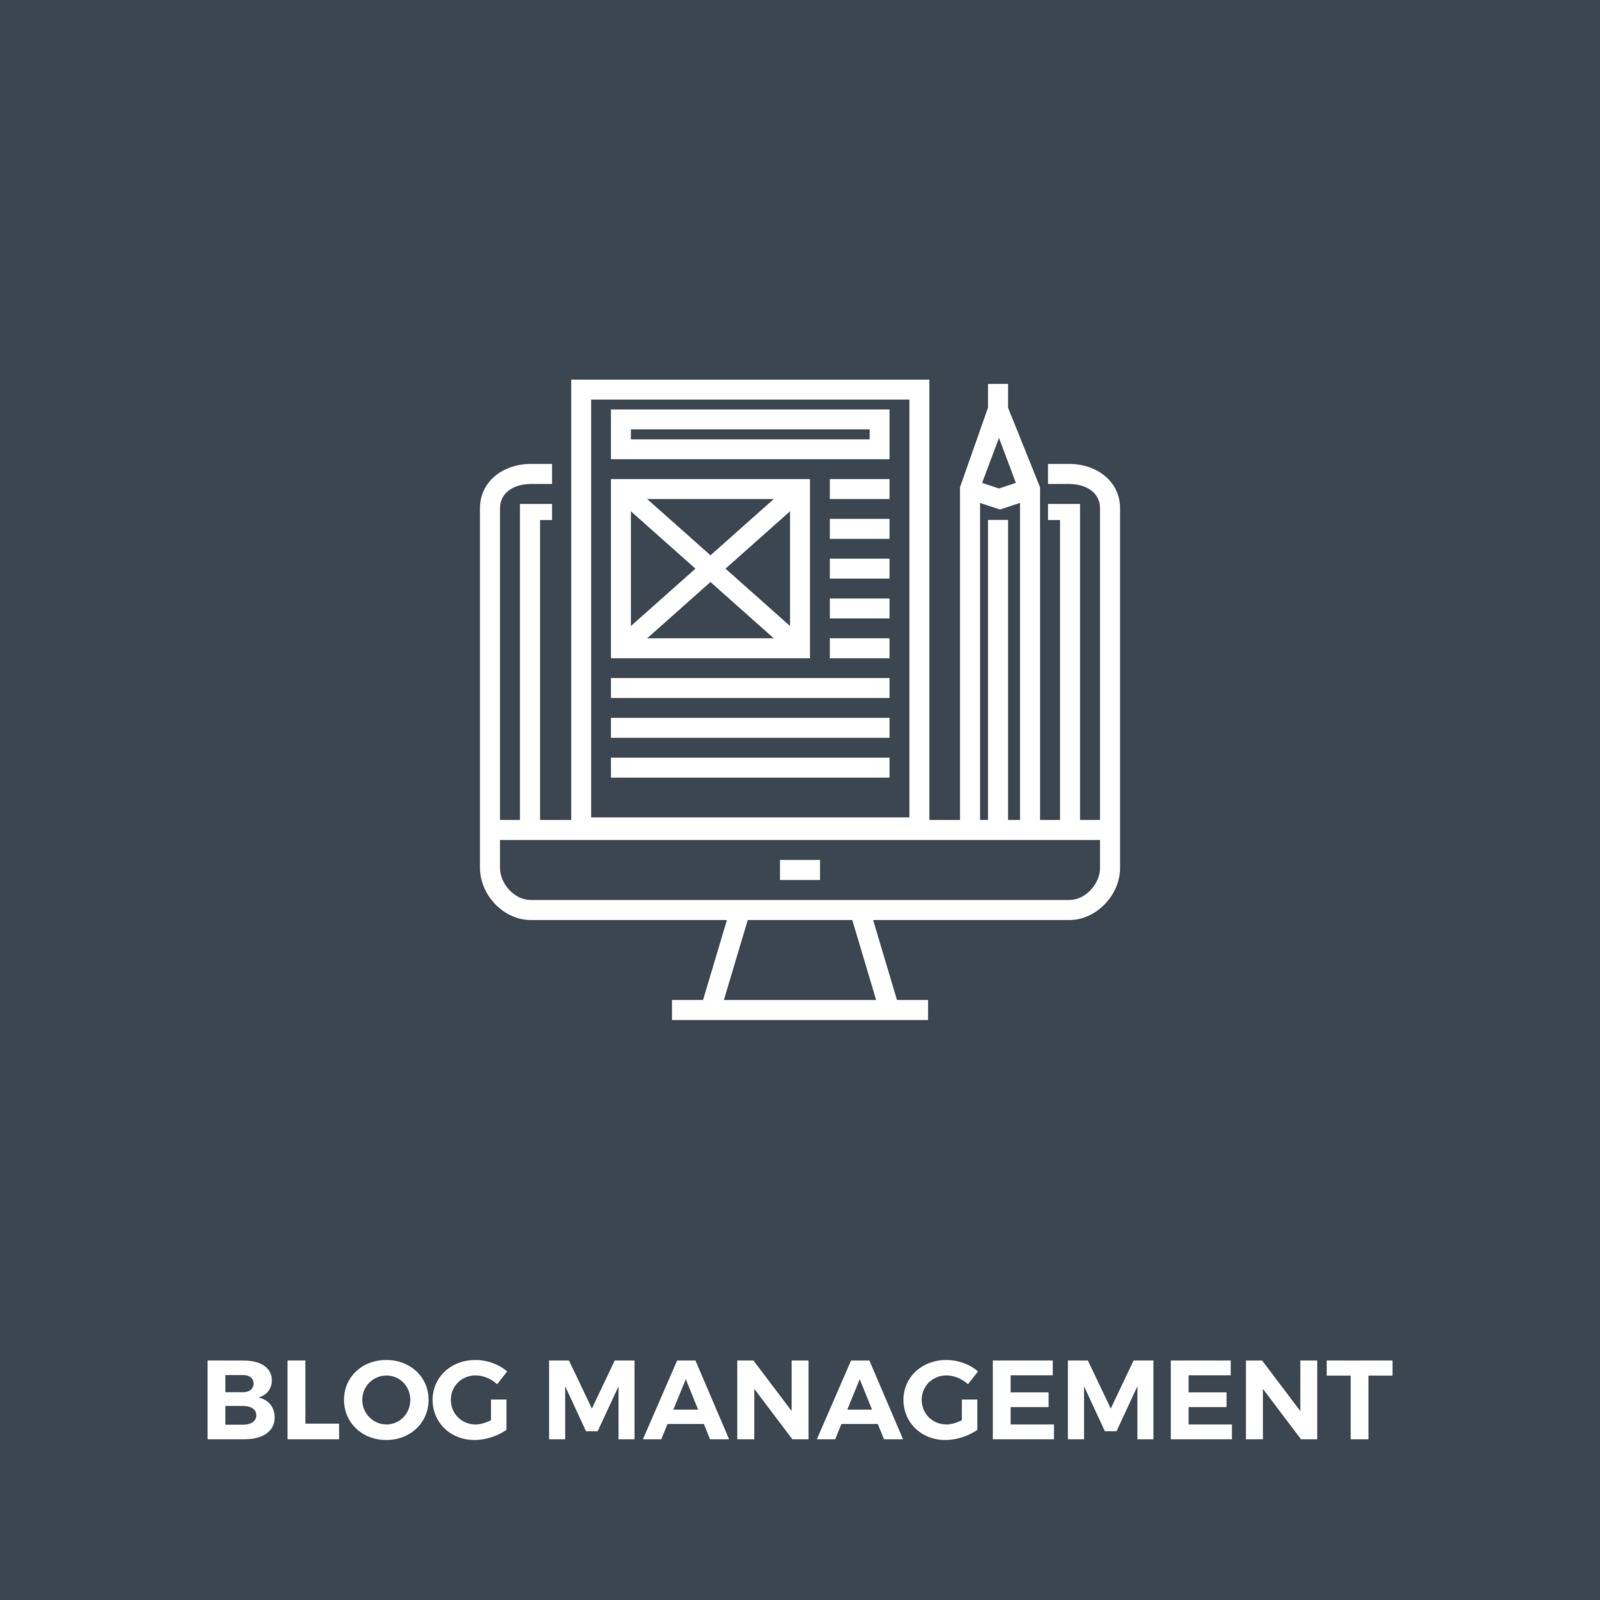 Blog Management Related Vector Thin Line Icon. Isolated on Black Background. Vector Illustration.